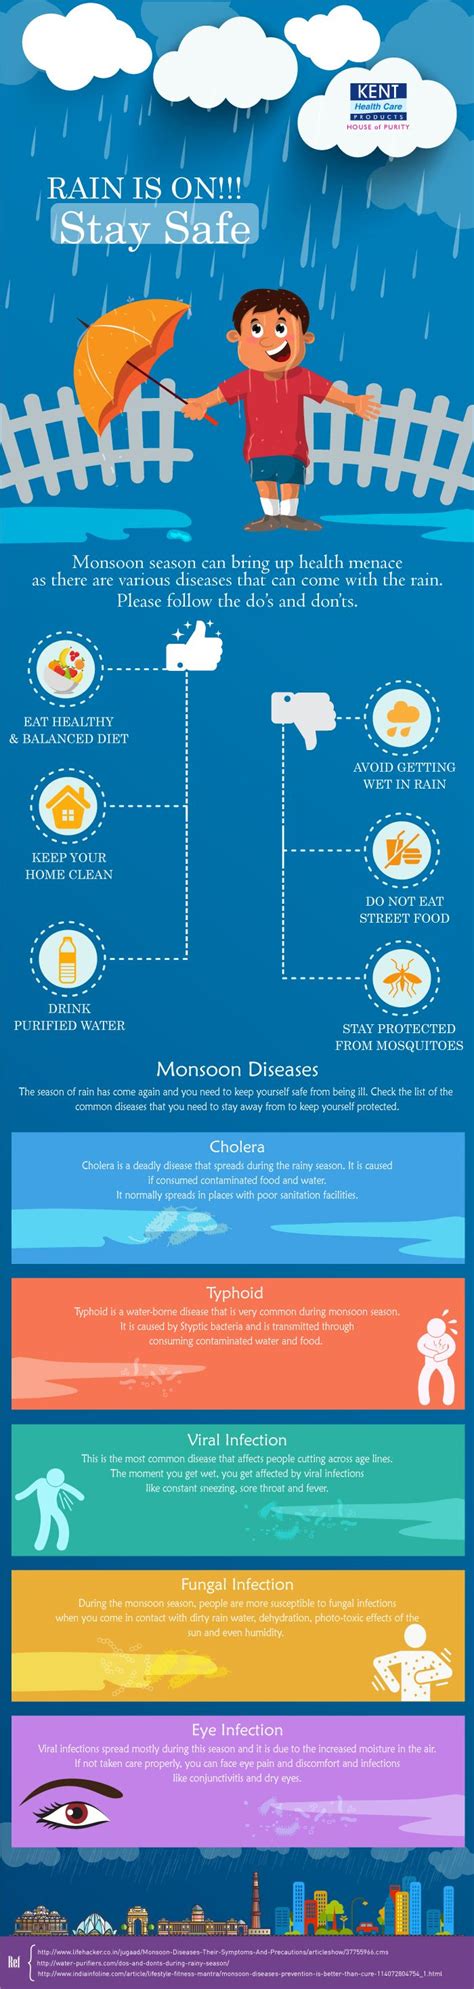 rain is on stay safe stay protected from waterborne diseases this monsoon by following the dos